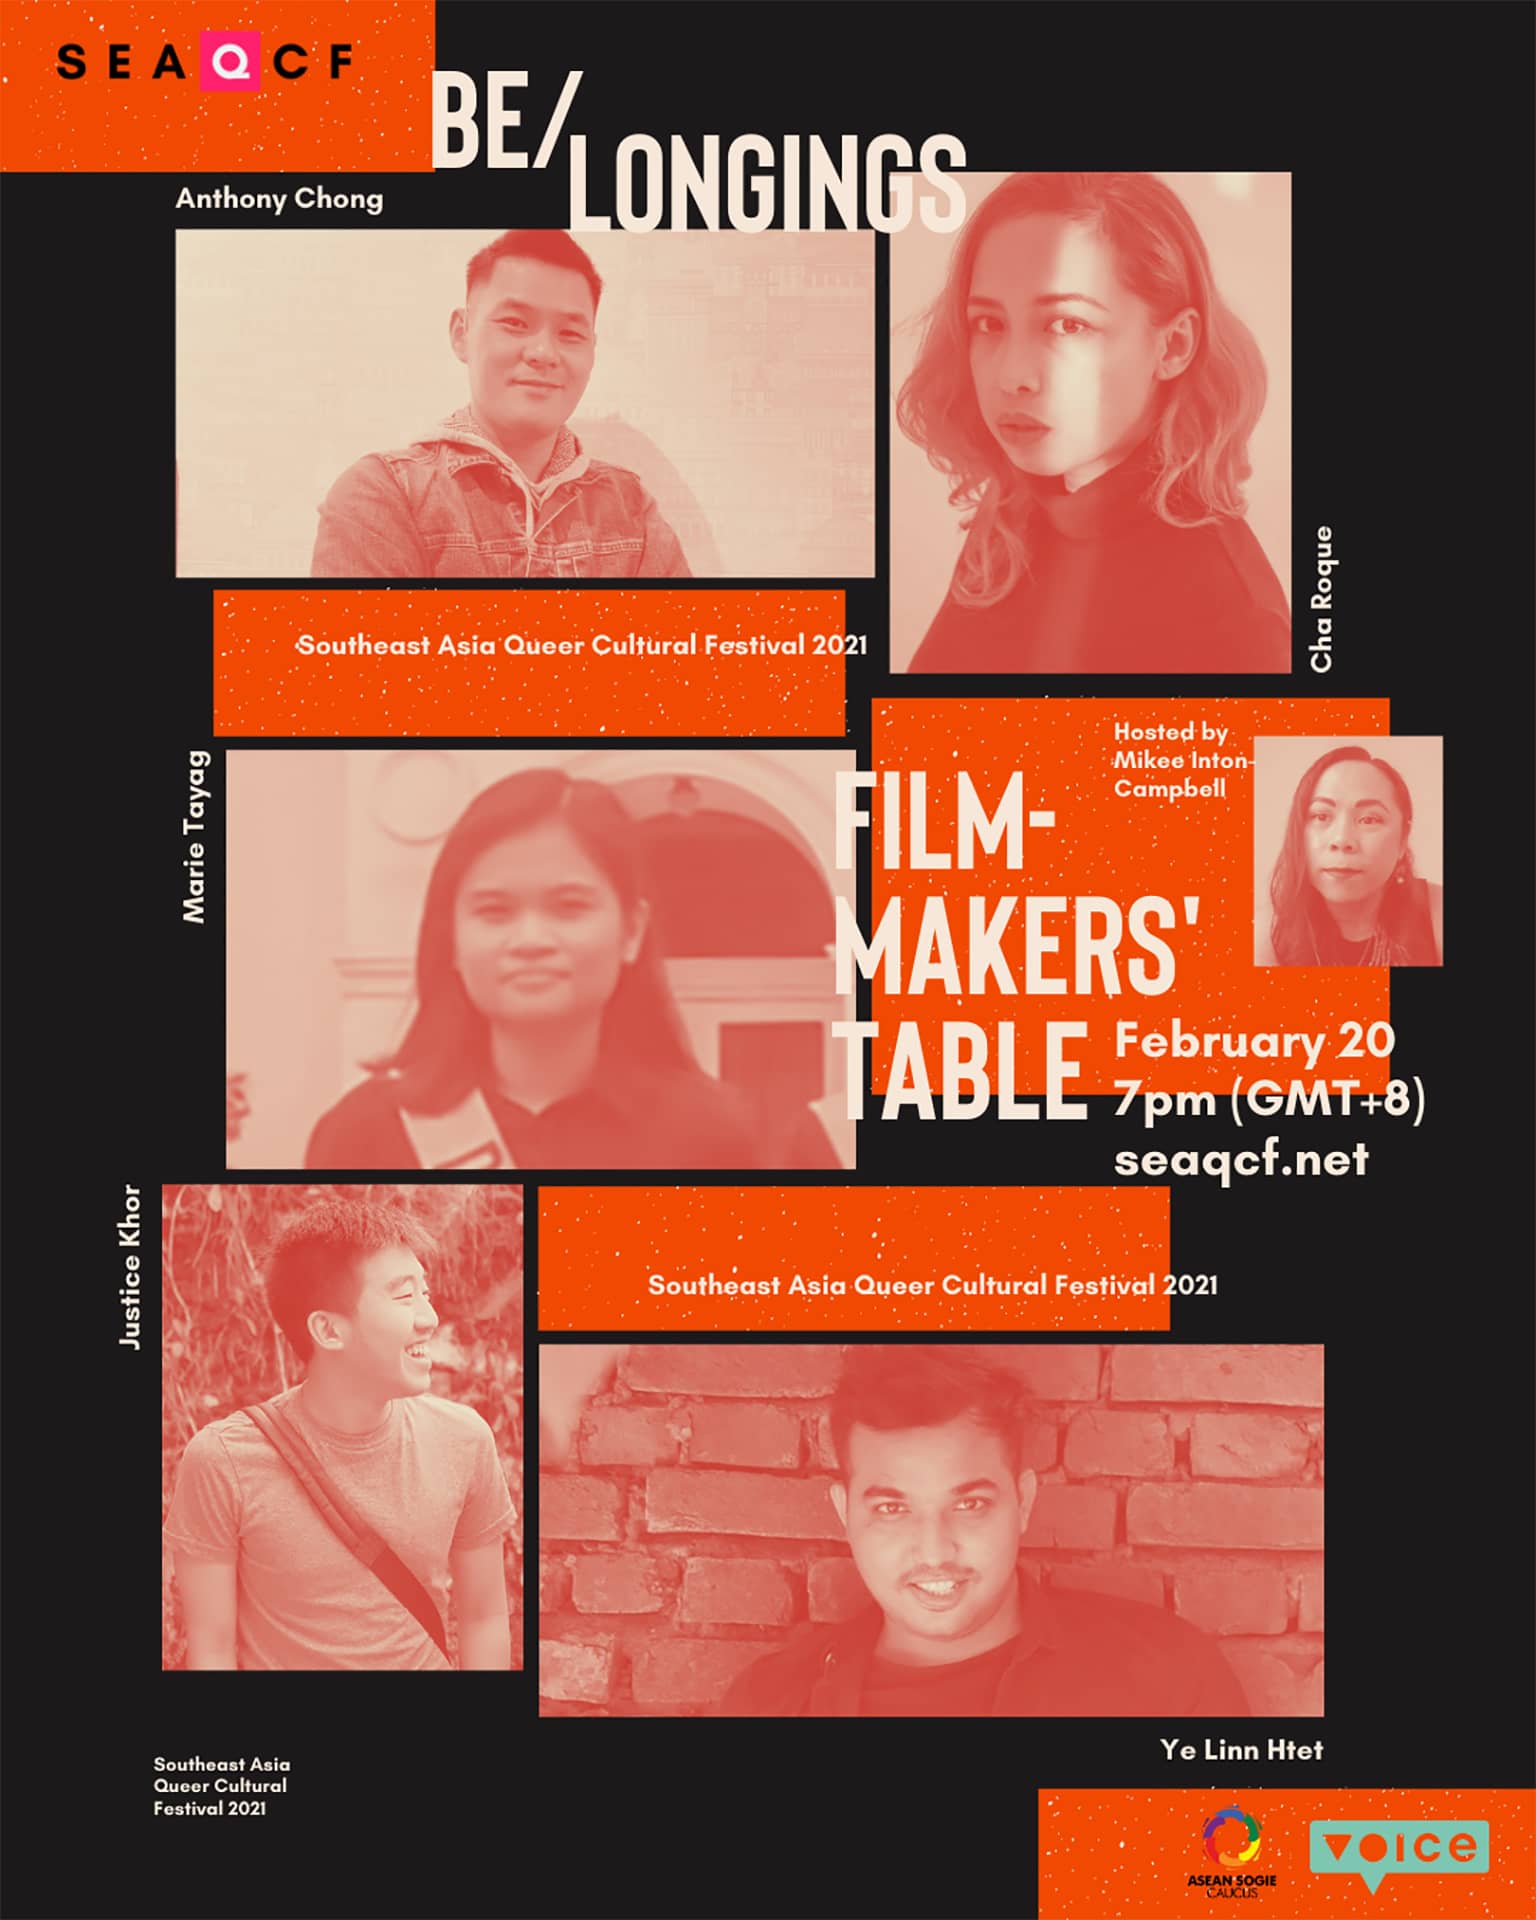 Filmmaker's Table, photo collage of Cha Roque, Anthony Chong, Marie Tayag, Justice Khor, Ye Linn Htet and Mikee Inton-Campbell